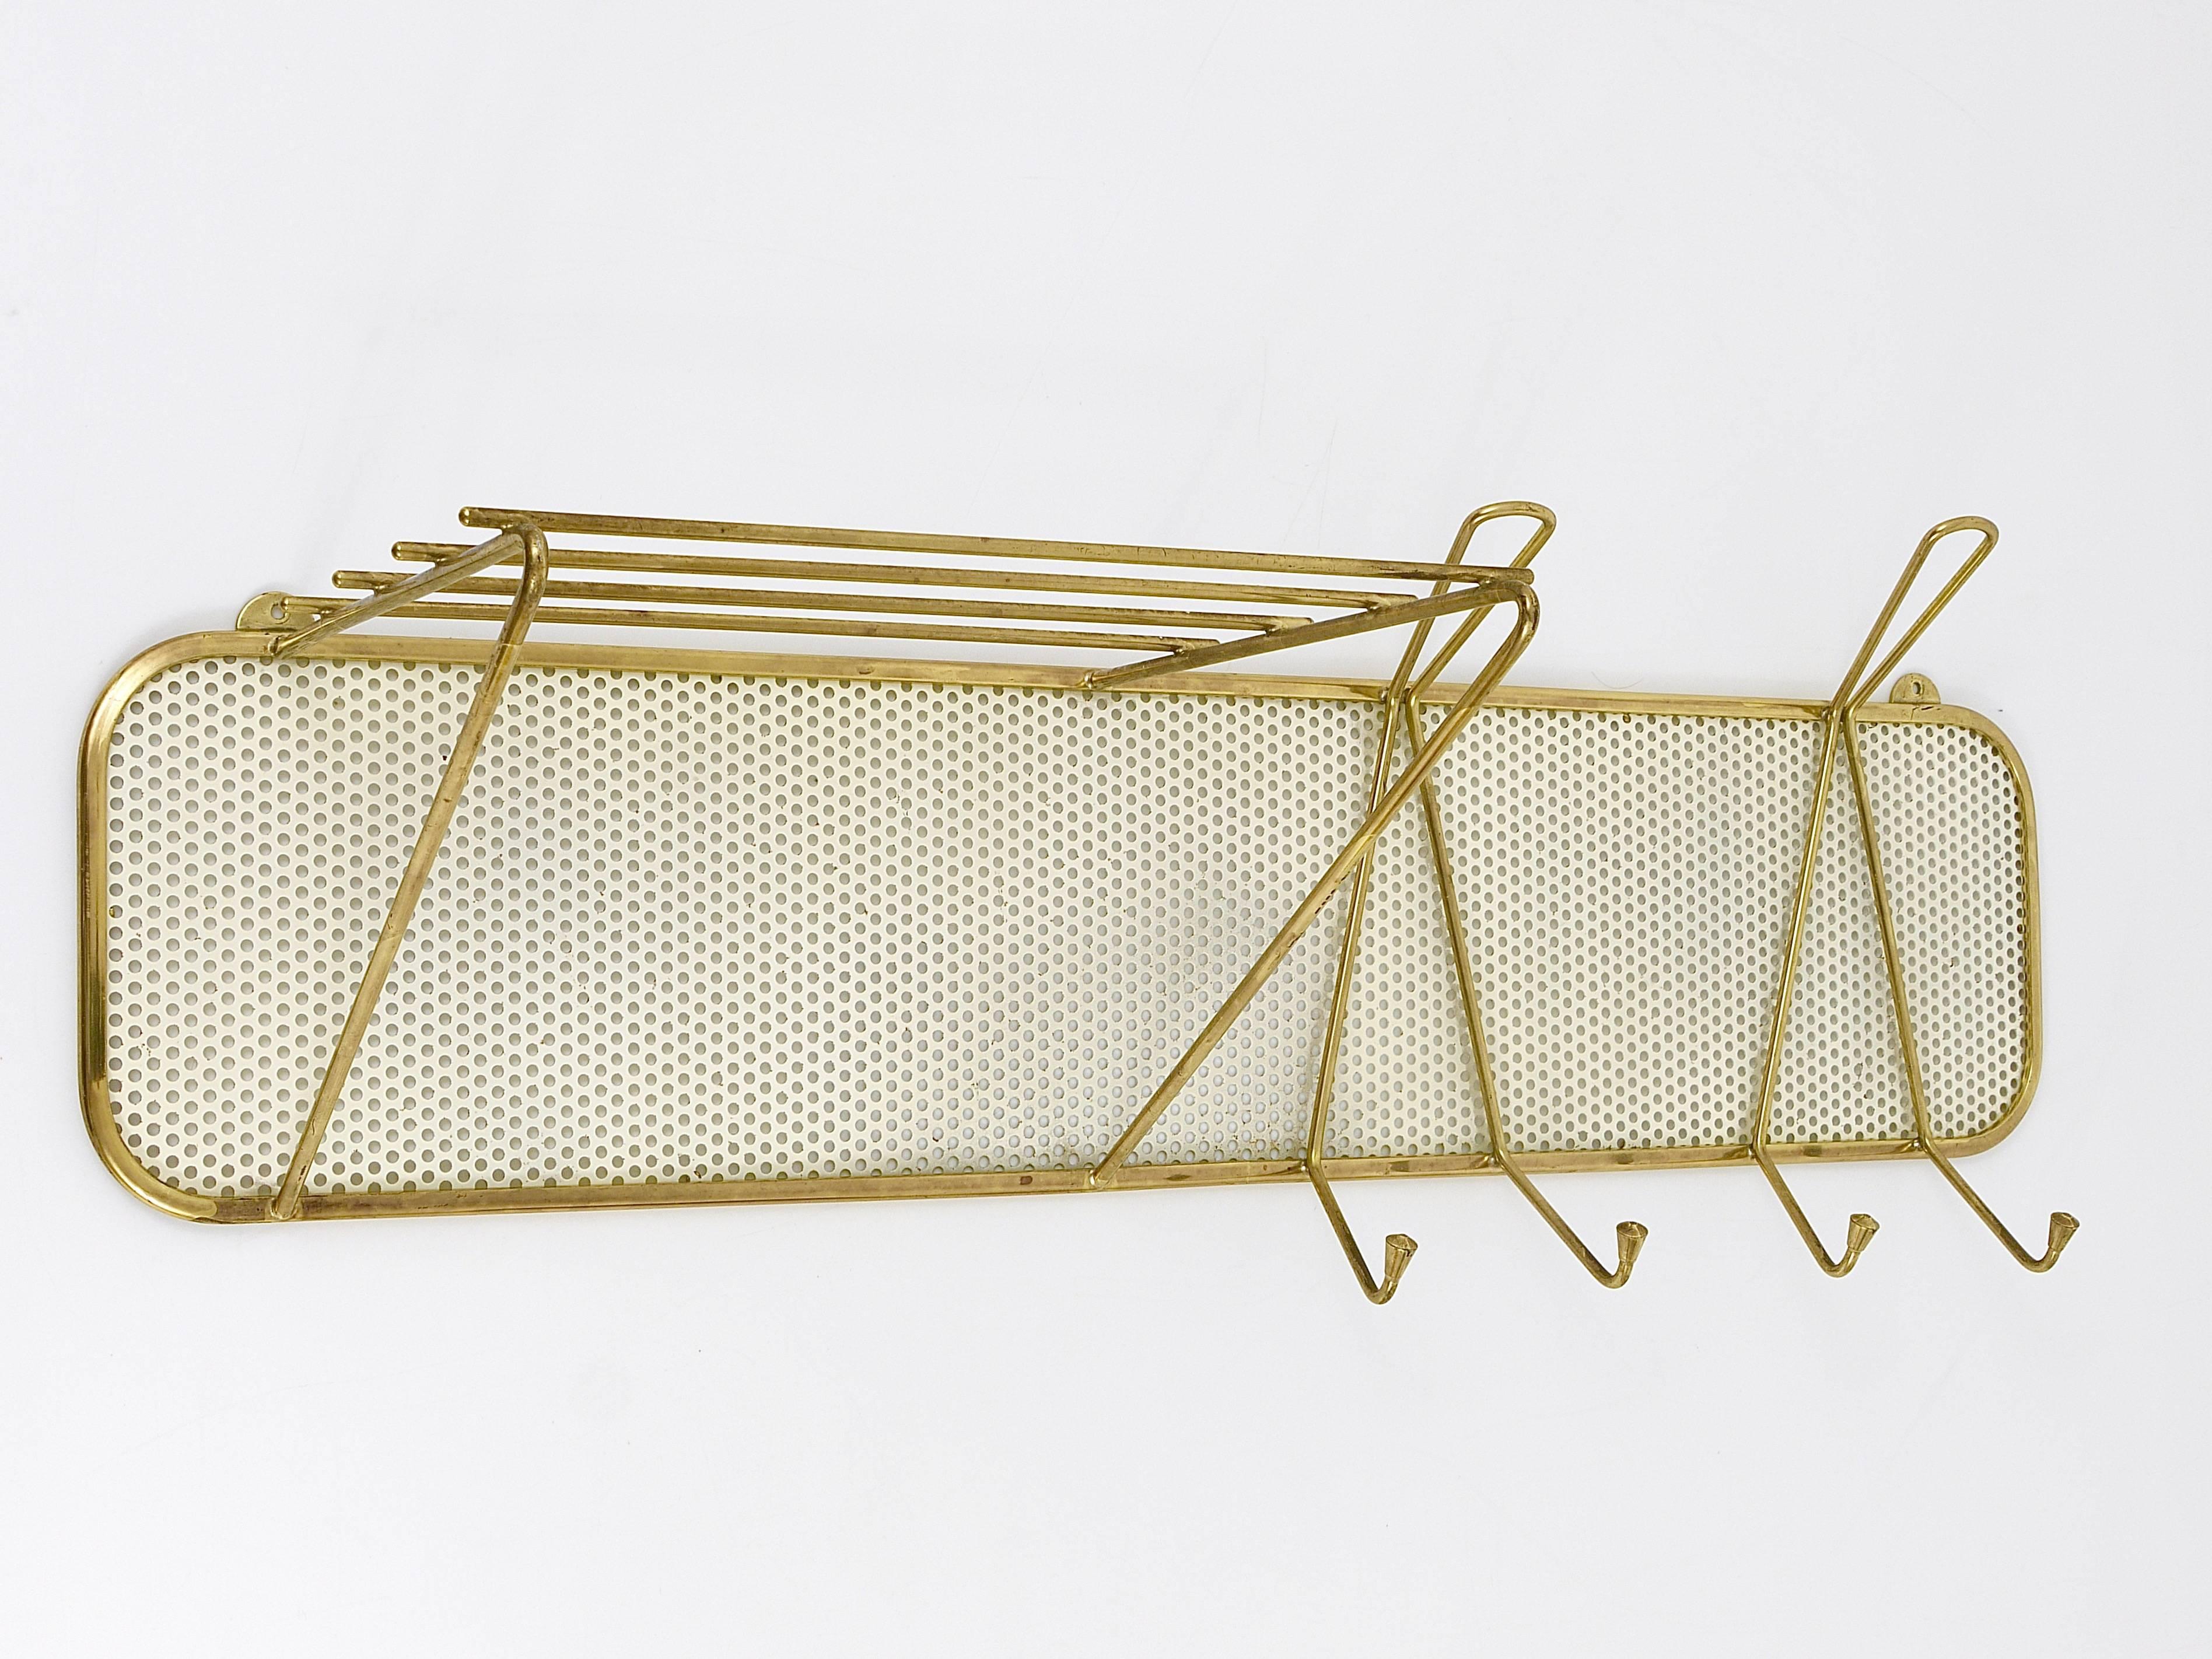 A beautiful modernist coat and hat wall racks from the 1950s. Manufactured by Münchner Werkstätten, Germany. Made of brass and white lacquered perforated metal sheet. In good condition with nice patina on the brass.